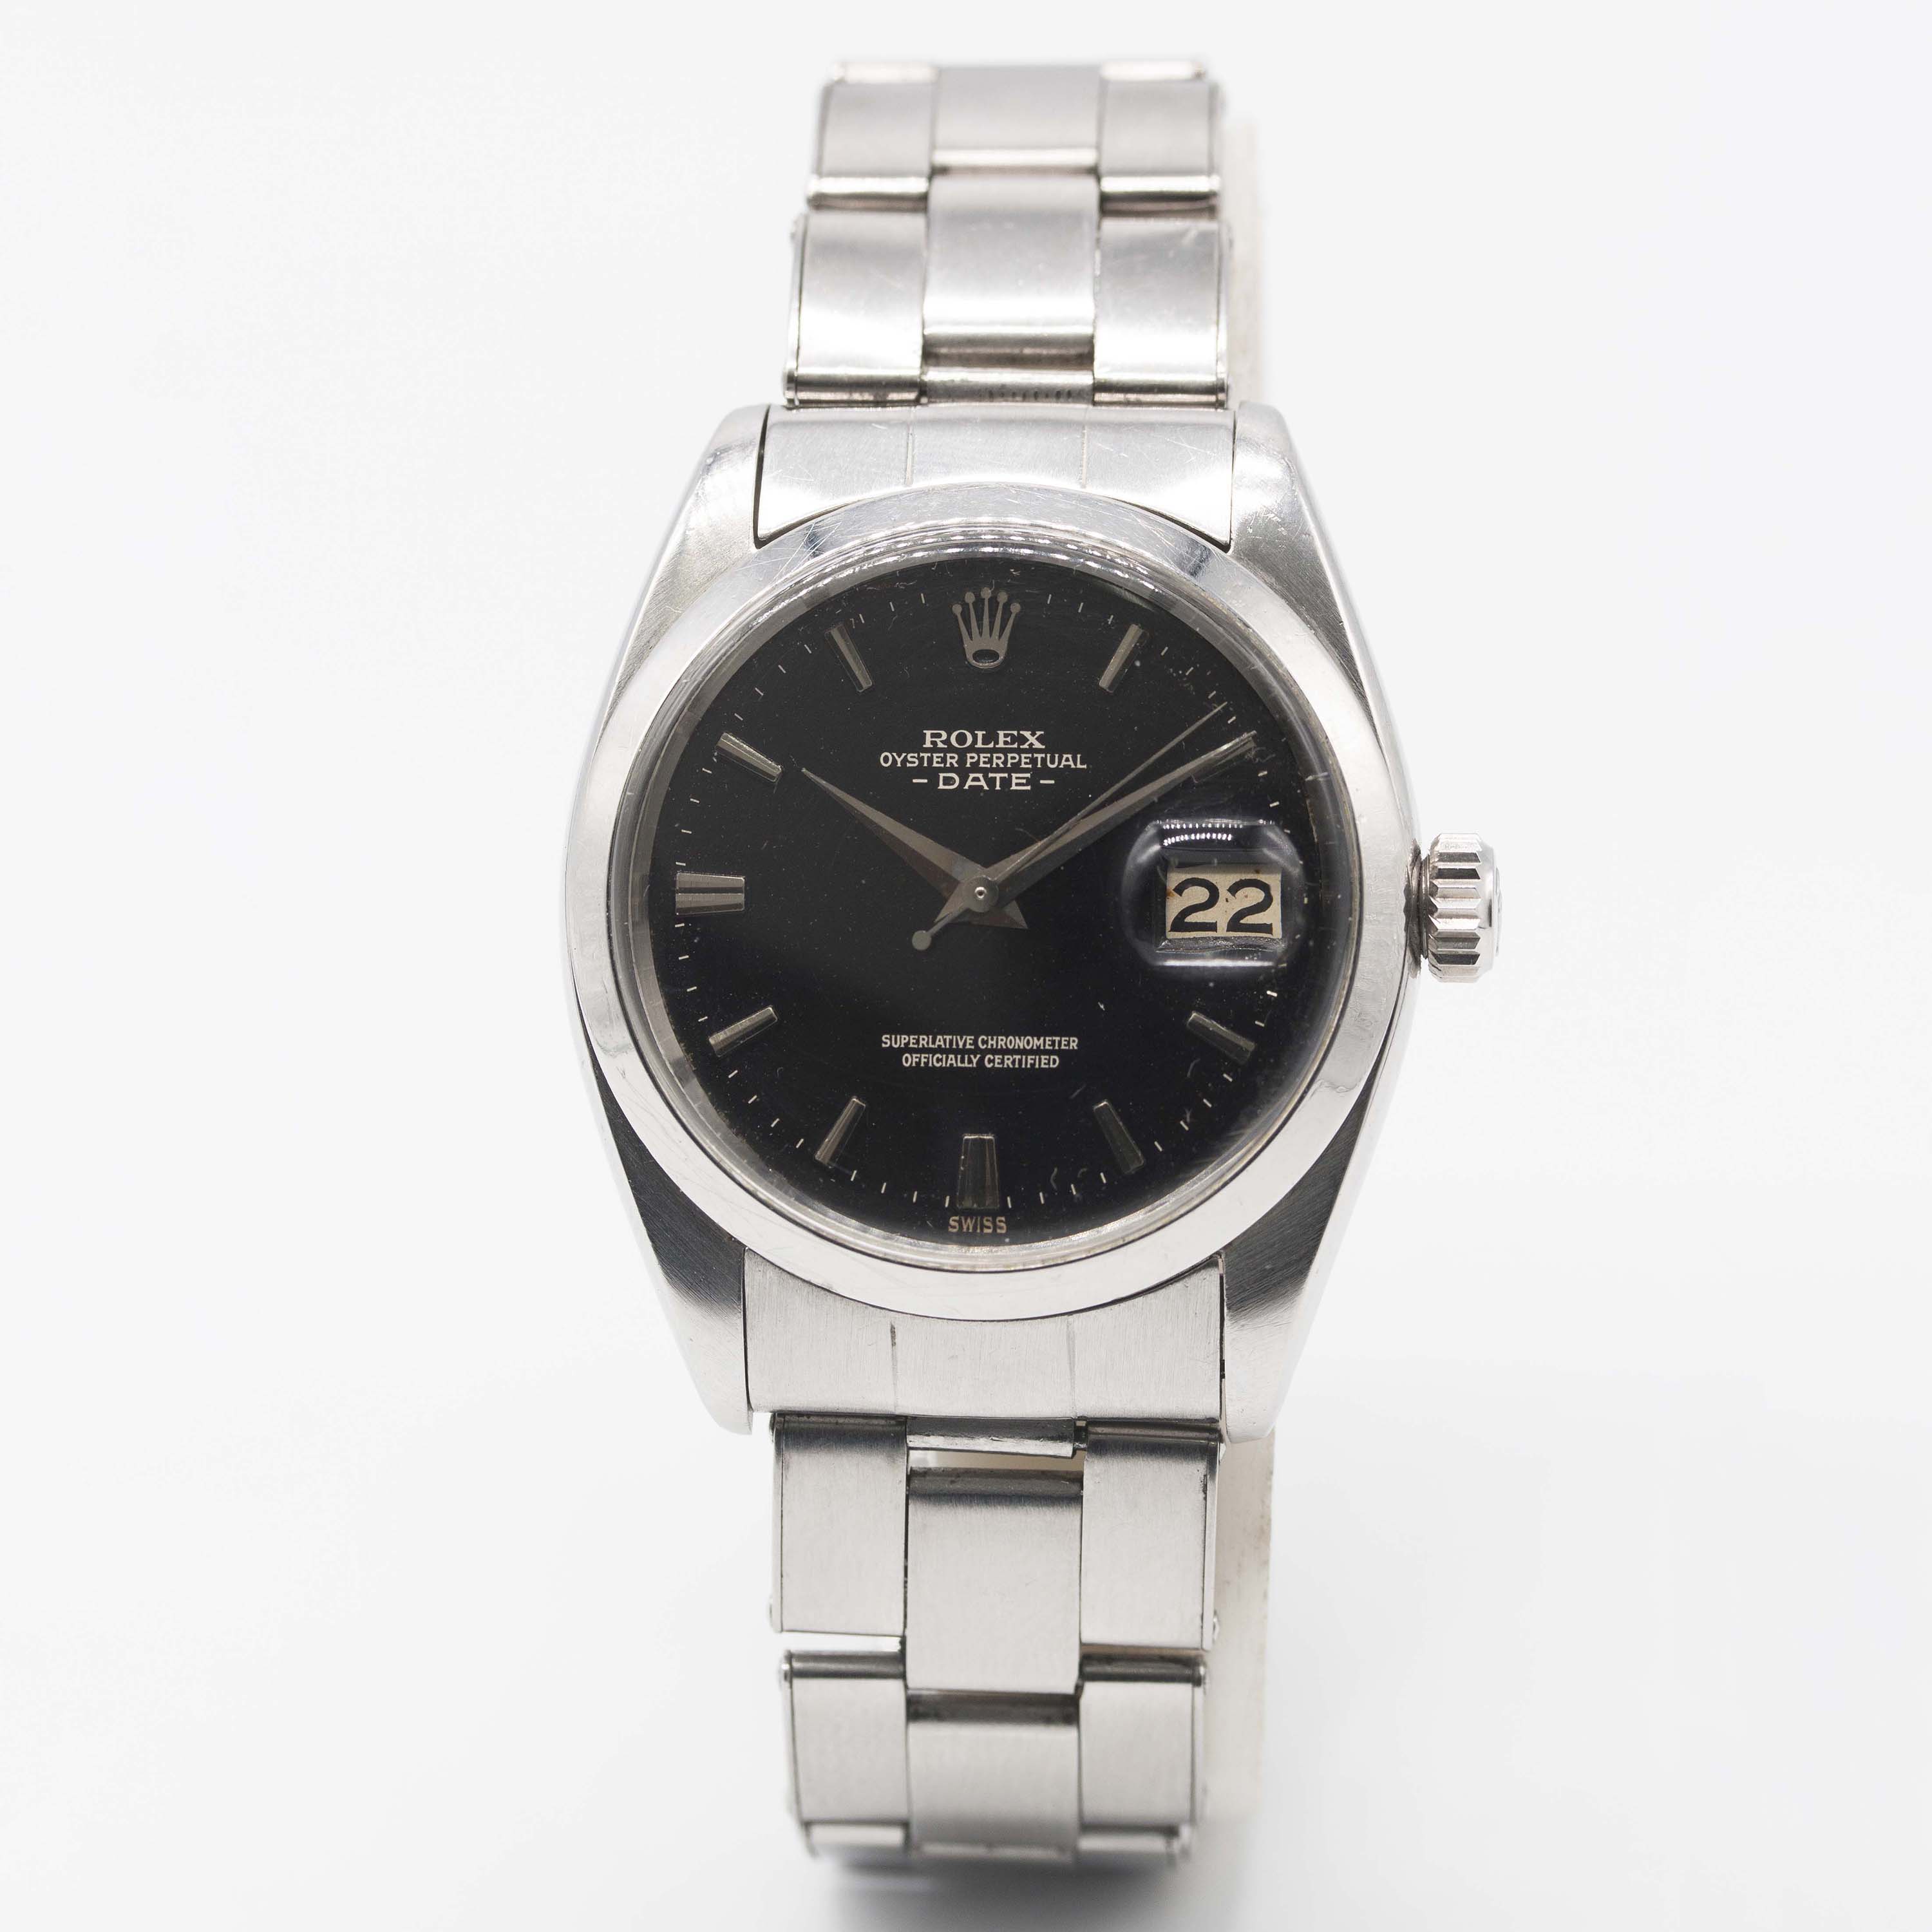 A GENTLEMAN'S STAINLESS STEEL ROLEX OYSTER PERPETUAL DATE BRACELET WATCH CIRCA 1961, REF. 1500 GLOSS - Image 2 of 12